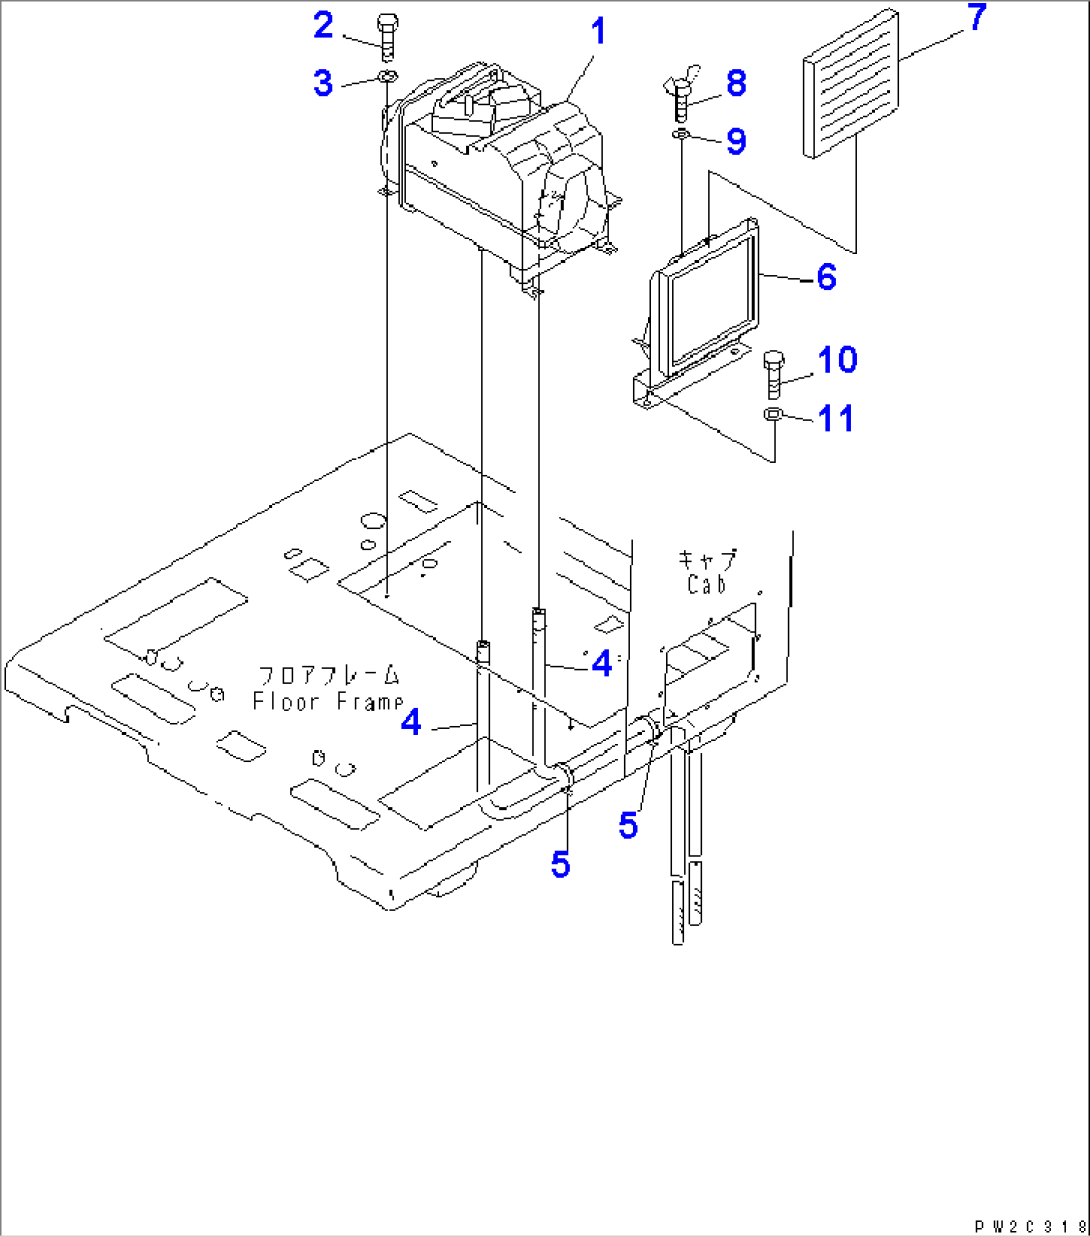 AIR CONDITIONER (1/12) (AIR CONDITIONER UNIT AND RELATED PARTS)(#10247-)